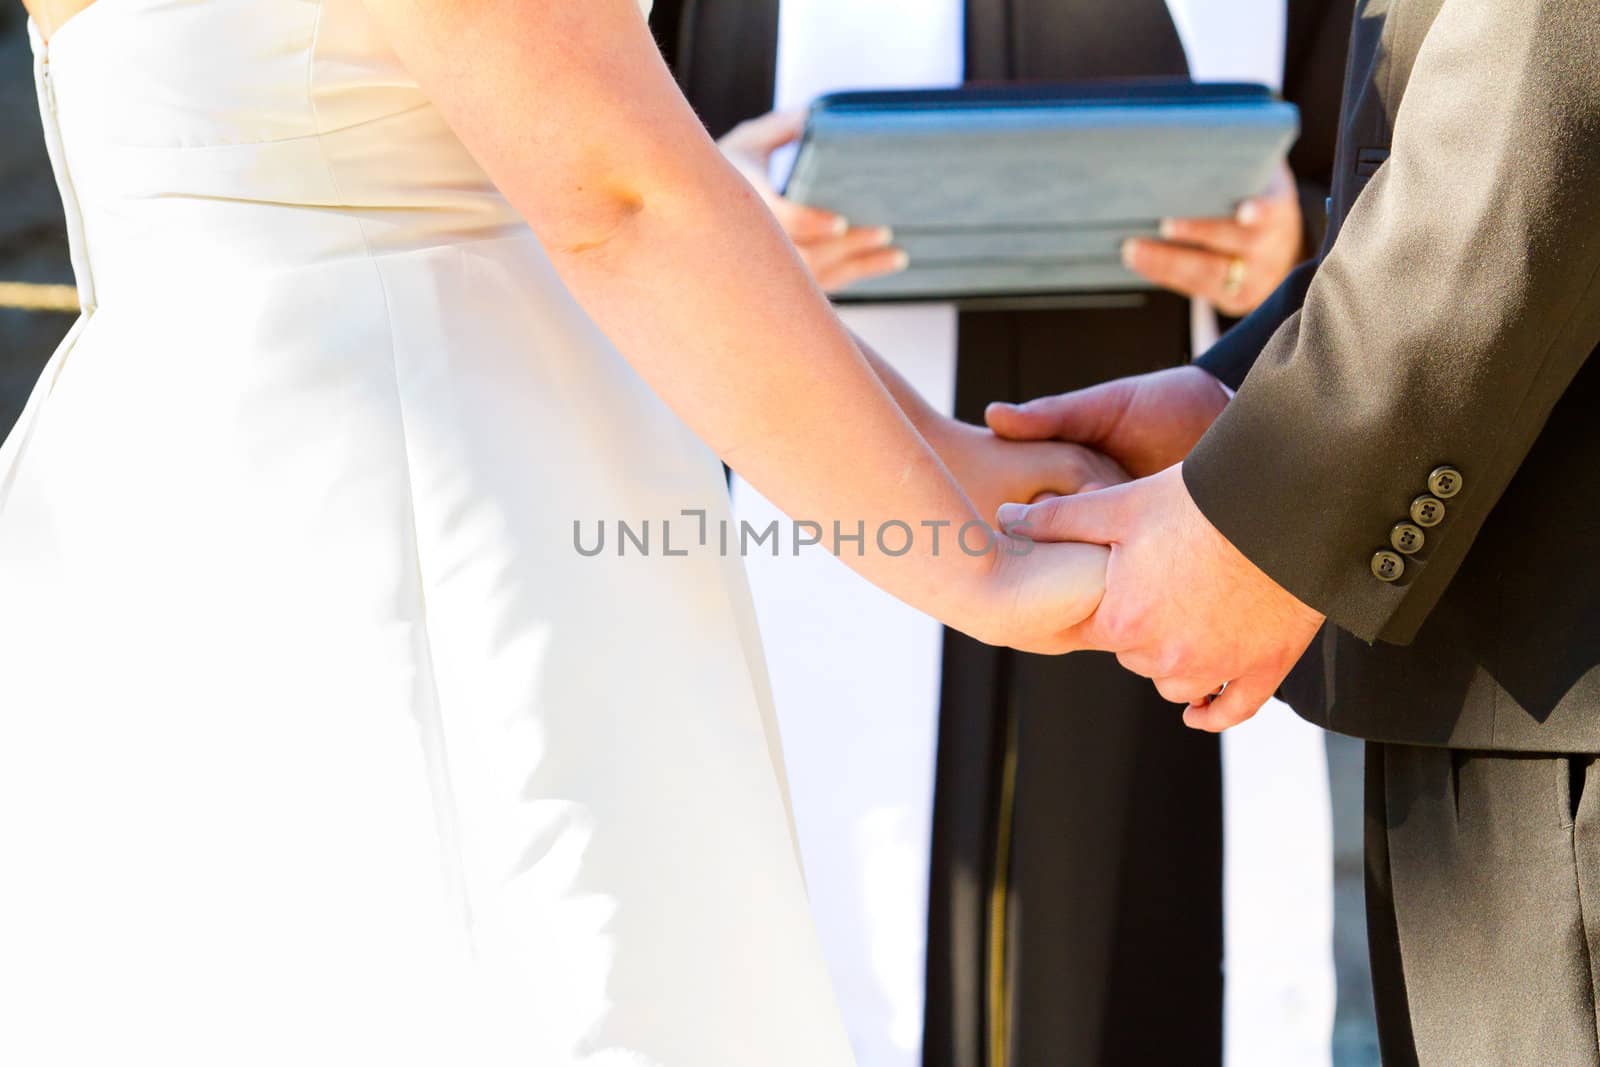 A bride and groom hold hands while reciting their wedding vows.